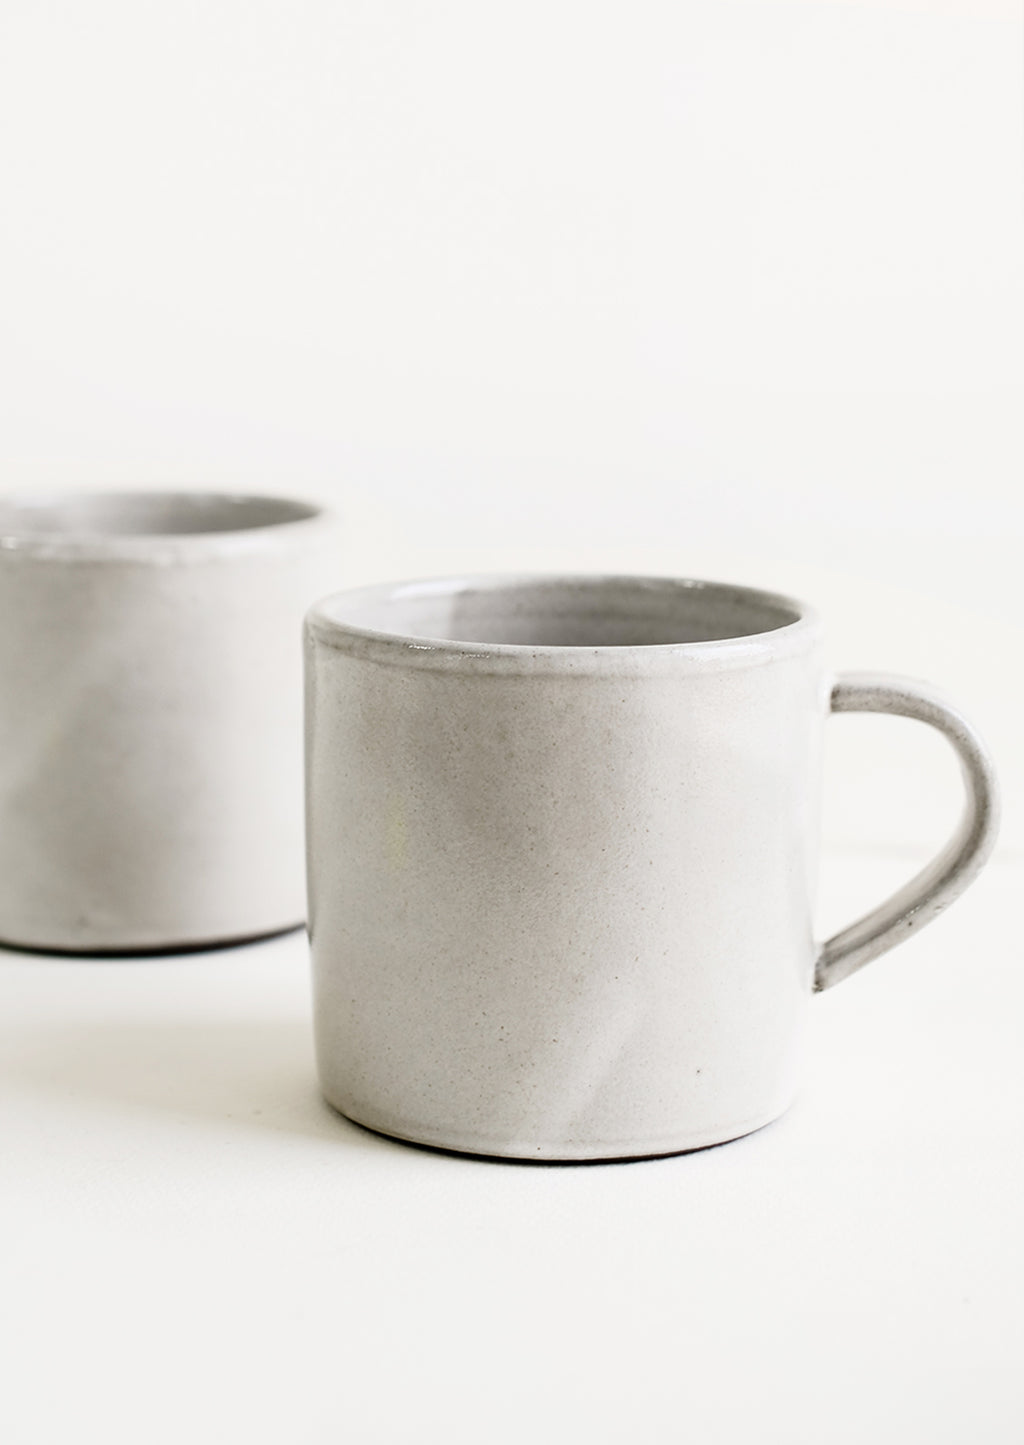 3: Two identical ceramic coffee mugs in a simple, classic shape in a white glaze over brown clay.